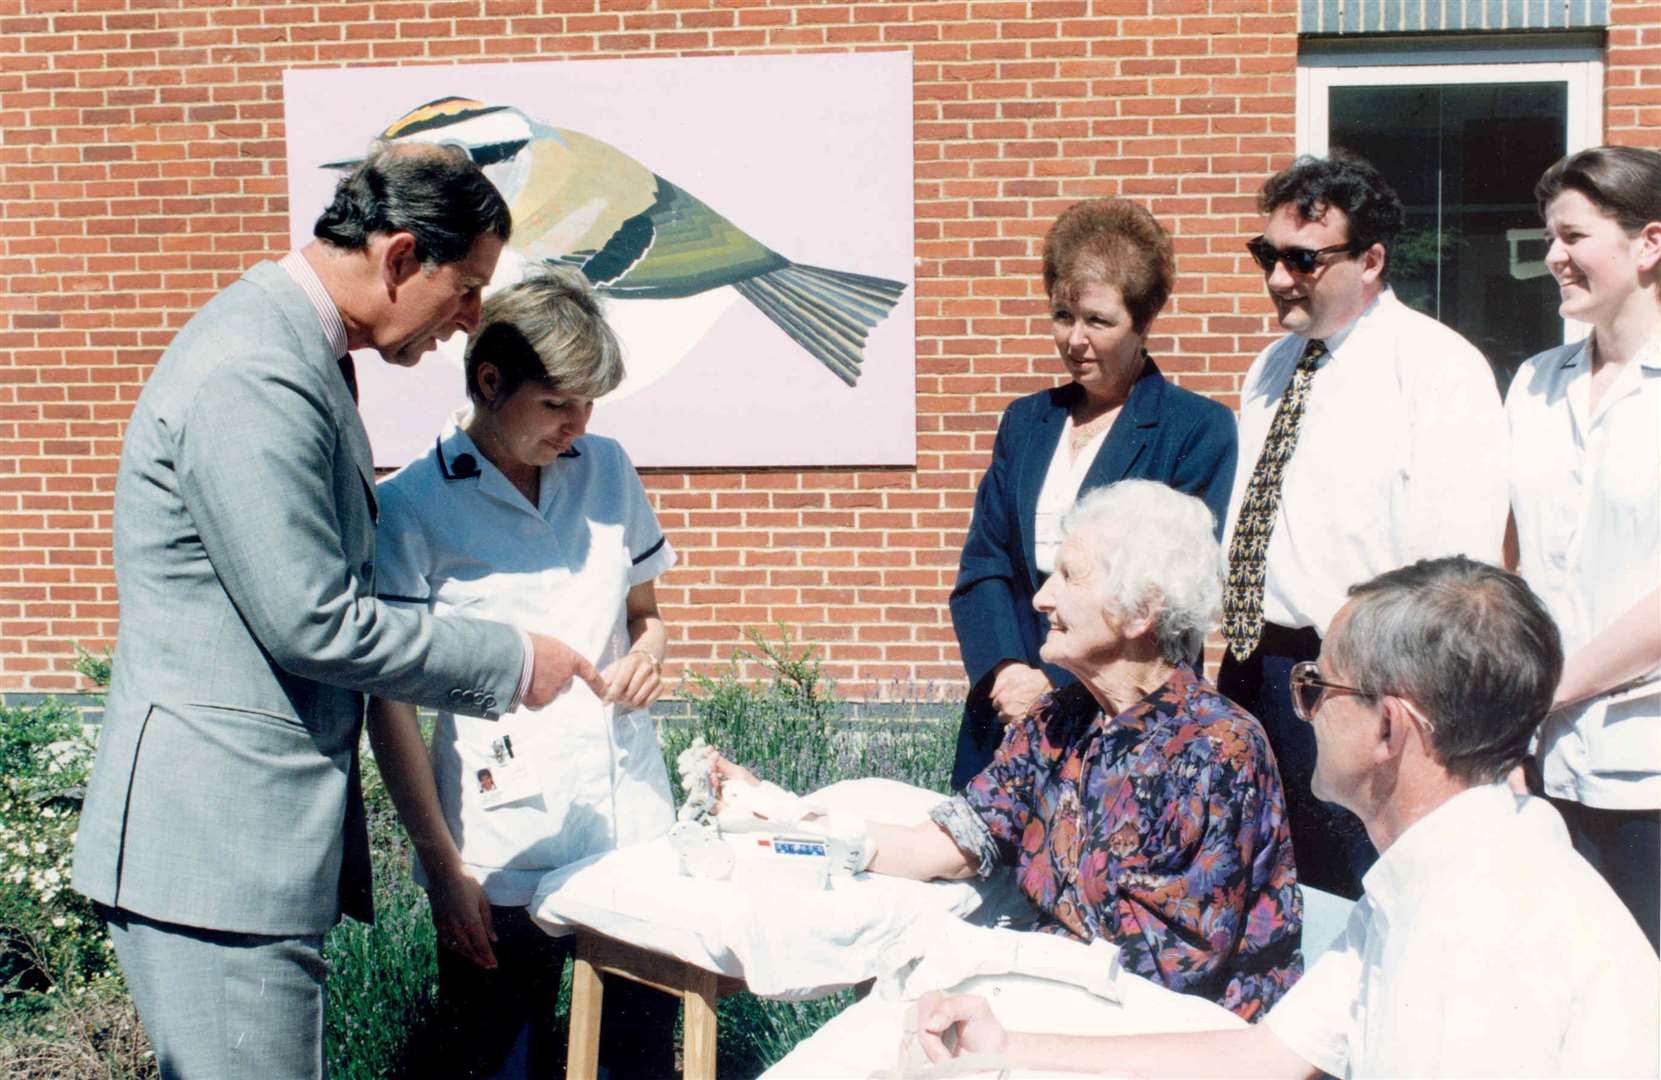 Prince Charles opened Thanet's hospital, names after his grandmother, the Queen Elizabeth the Queen Mother Hospital, in June 1996. Signed portraits of both the Queen Mother and the Prince of Wales have been given pride of place in the entrance hall. The Prince is seen here with physiotherapy patient Florence Hobson, 77, from Broadstairs